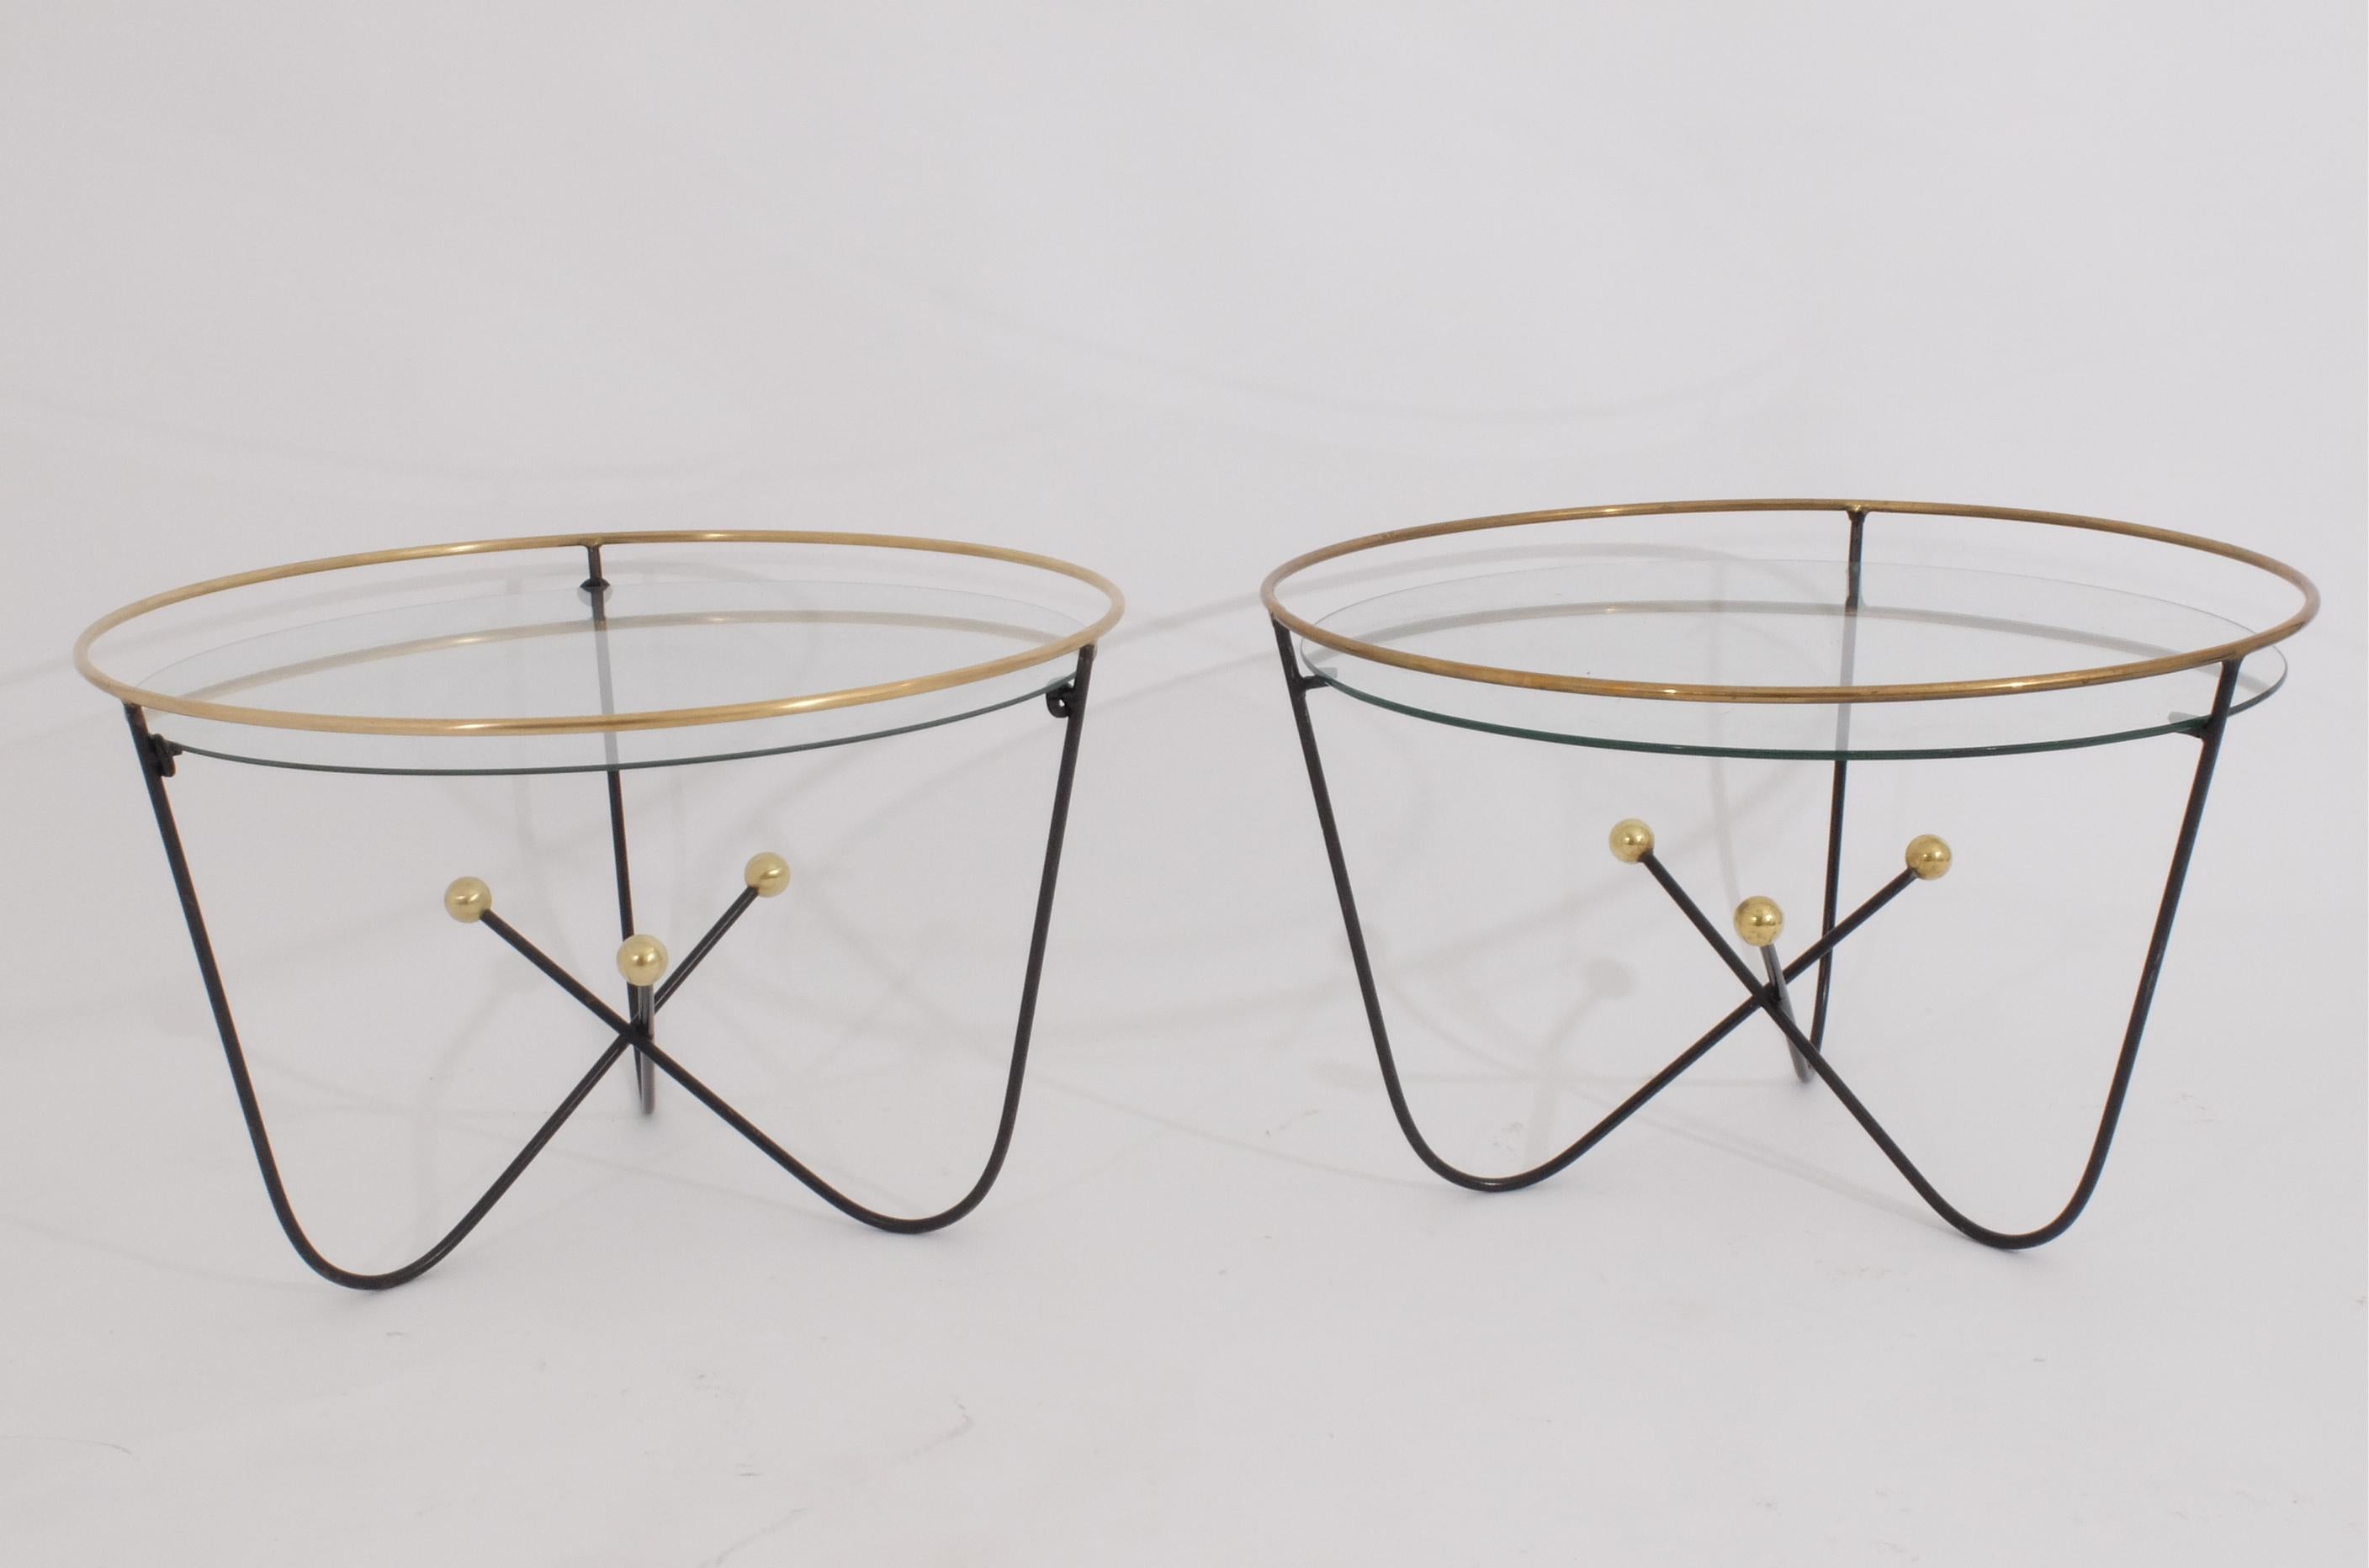 Edward Ihnatowicz for Mars Furniture and retailed by Heals London in the 1950s.
These little midcentury low table are typical of the 1951 festival of Britain style championed by British designers such as Ernest Race.
Painted metal and brass, glass